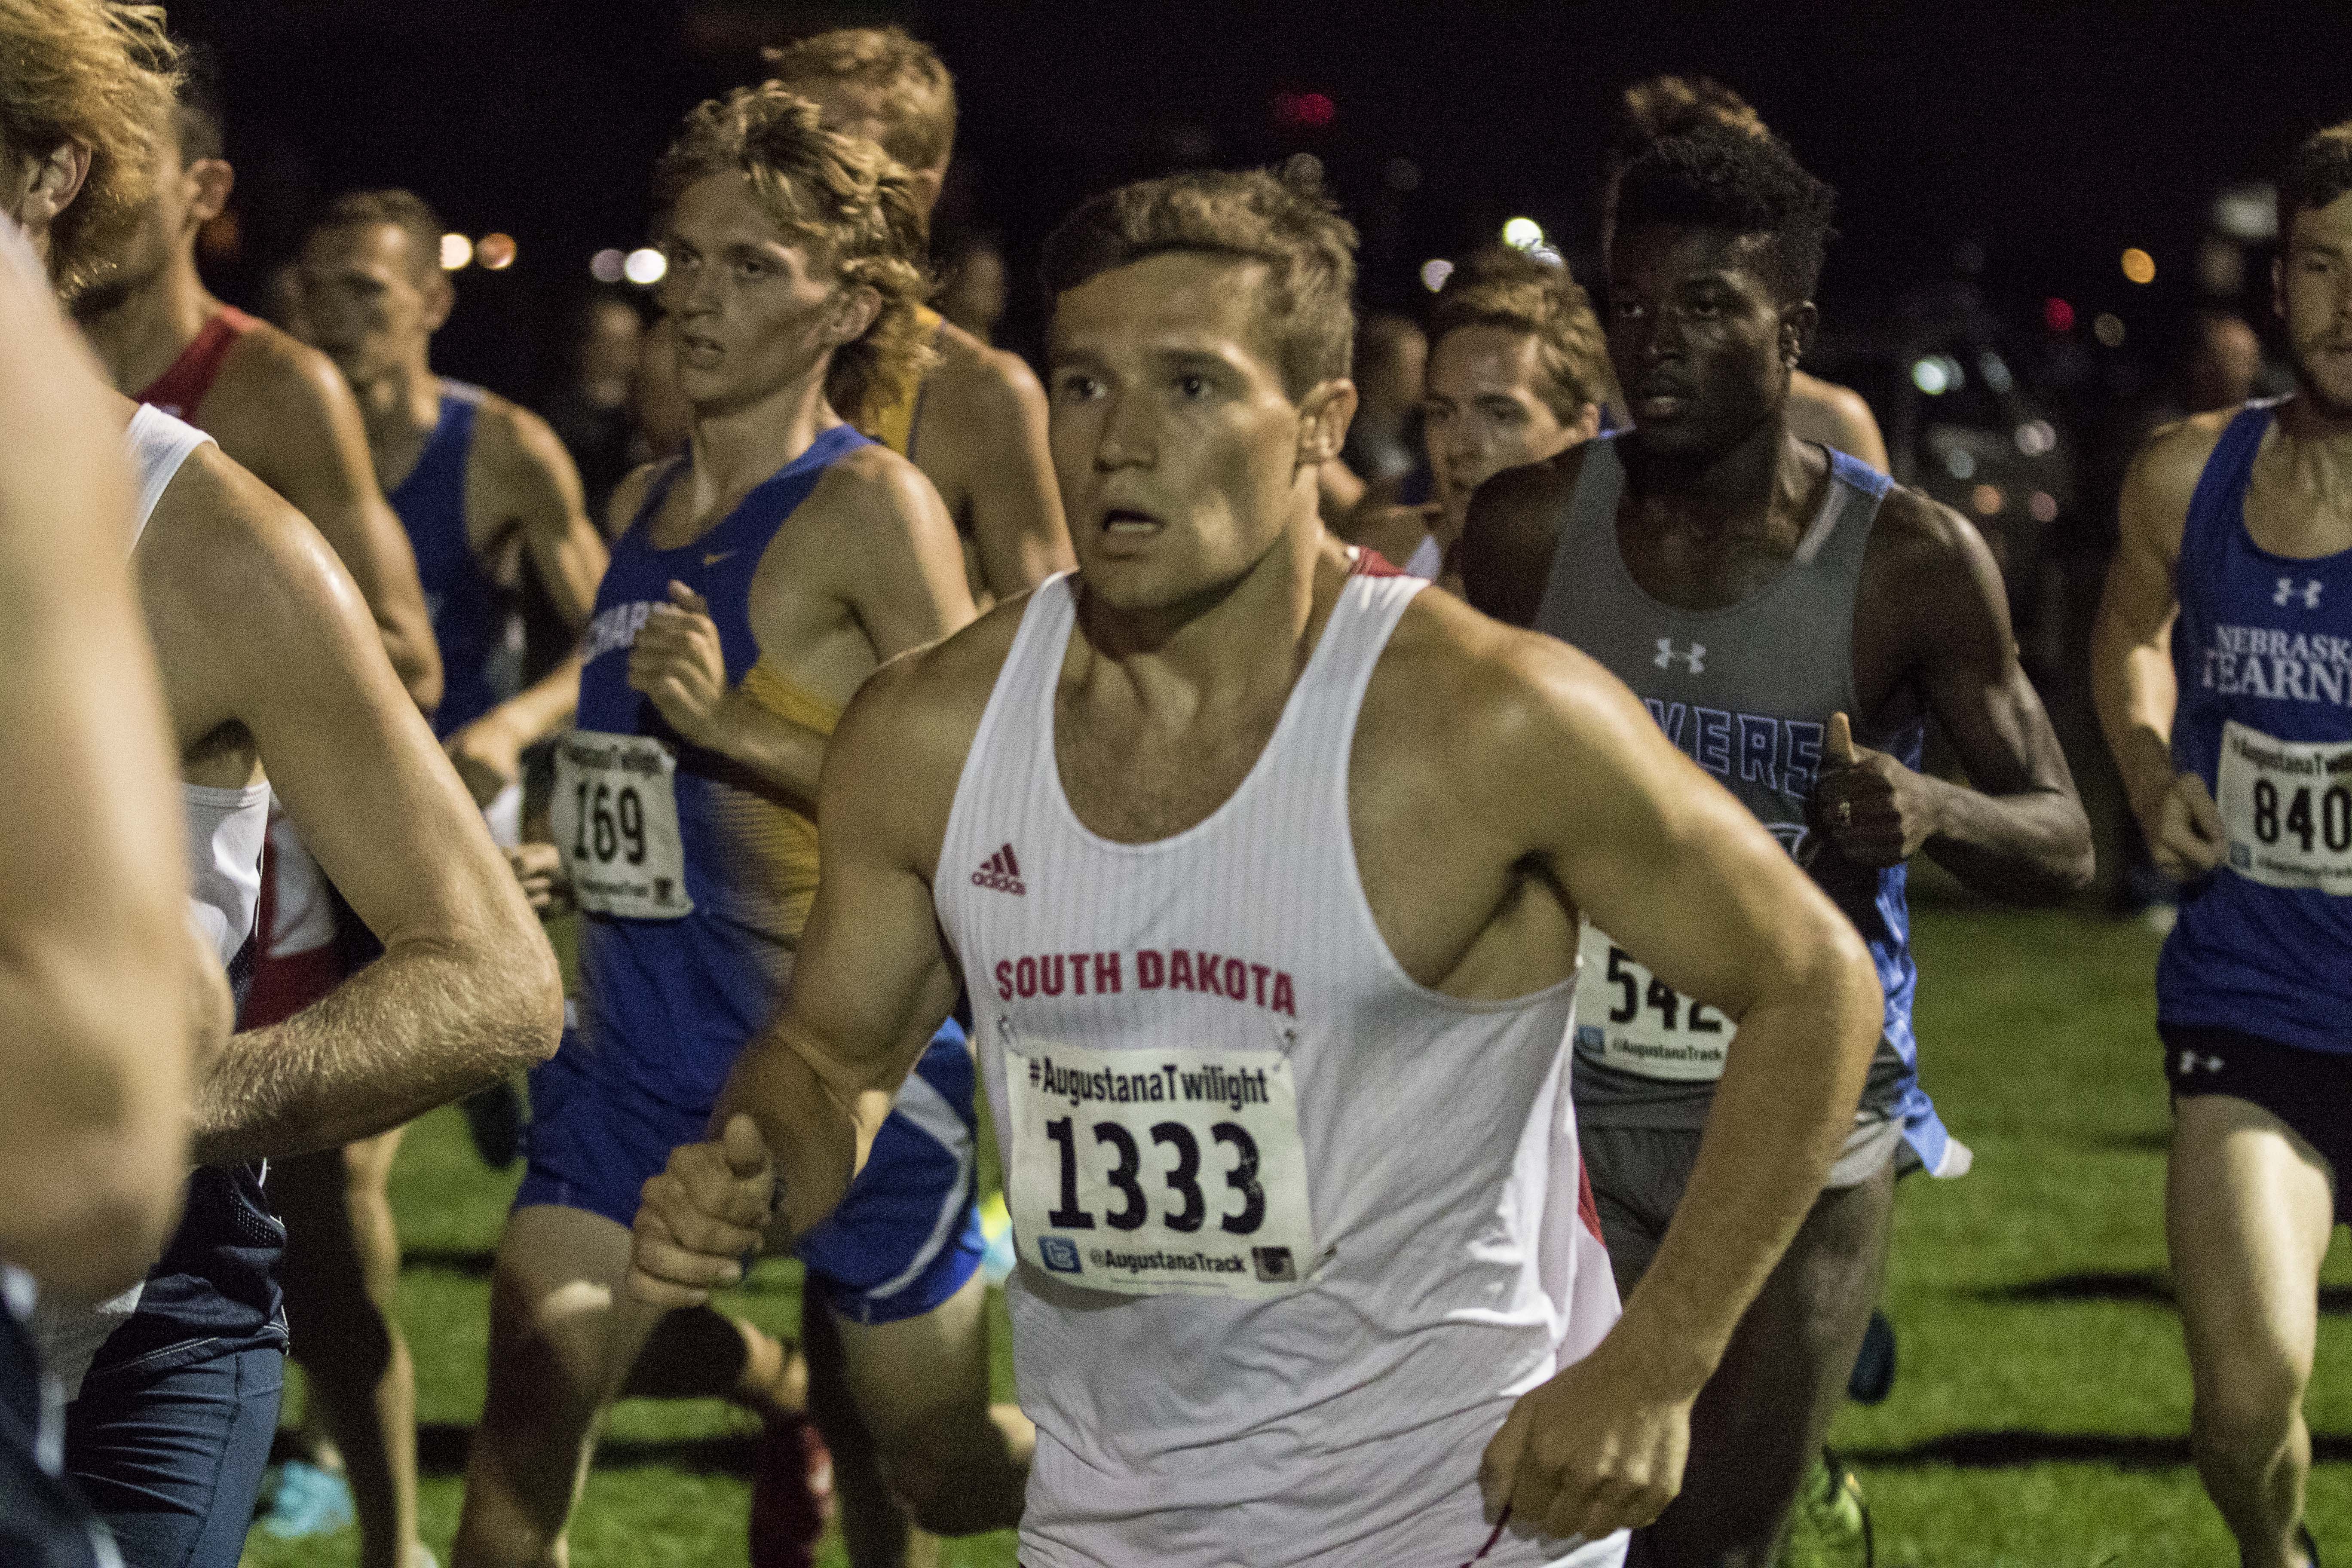 USD to host two Summit League championships this year